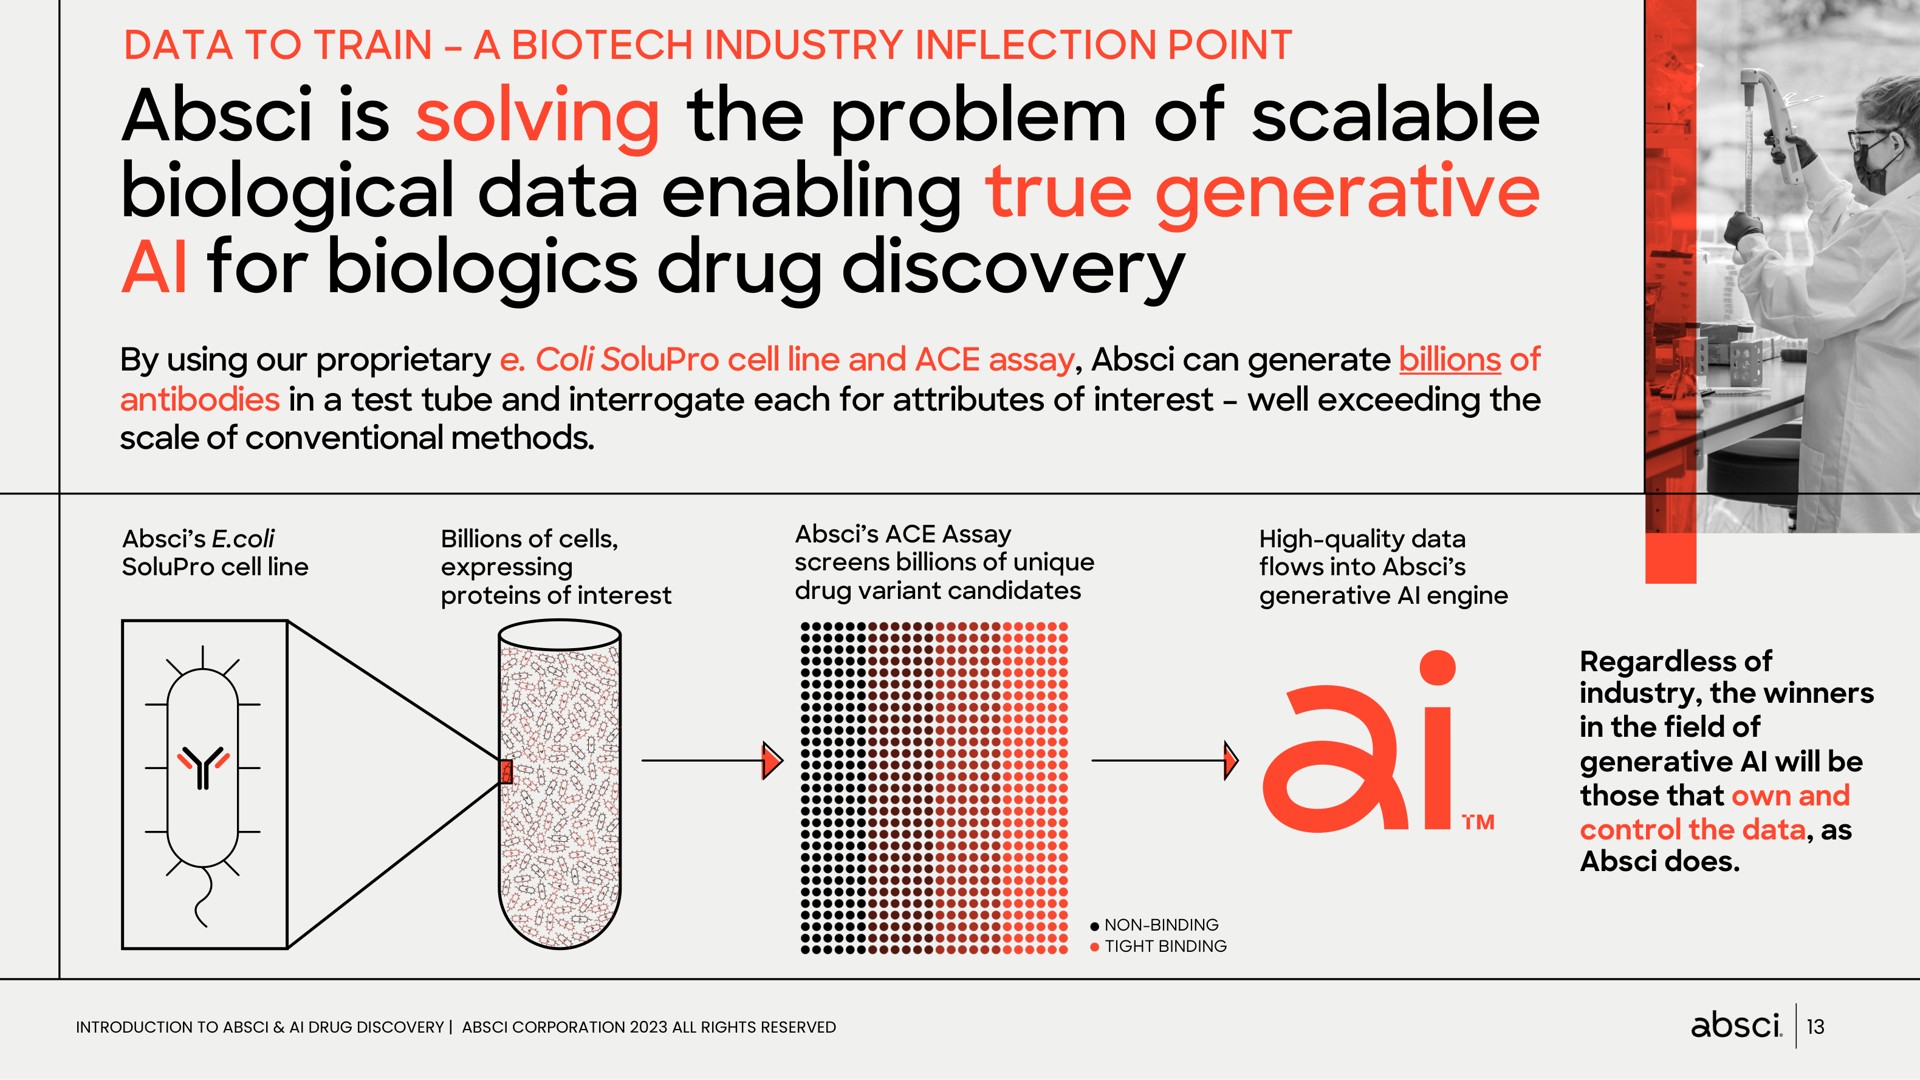 data to train a industry inflection point is solving the problem of scalable biological data enabling true generative for drug discovery | Absci